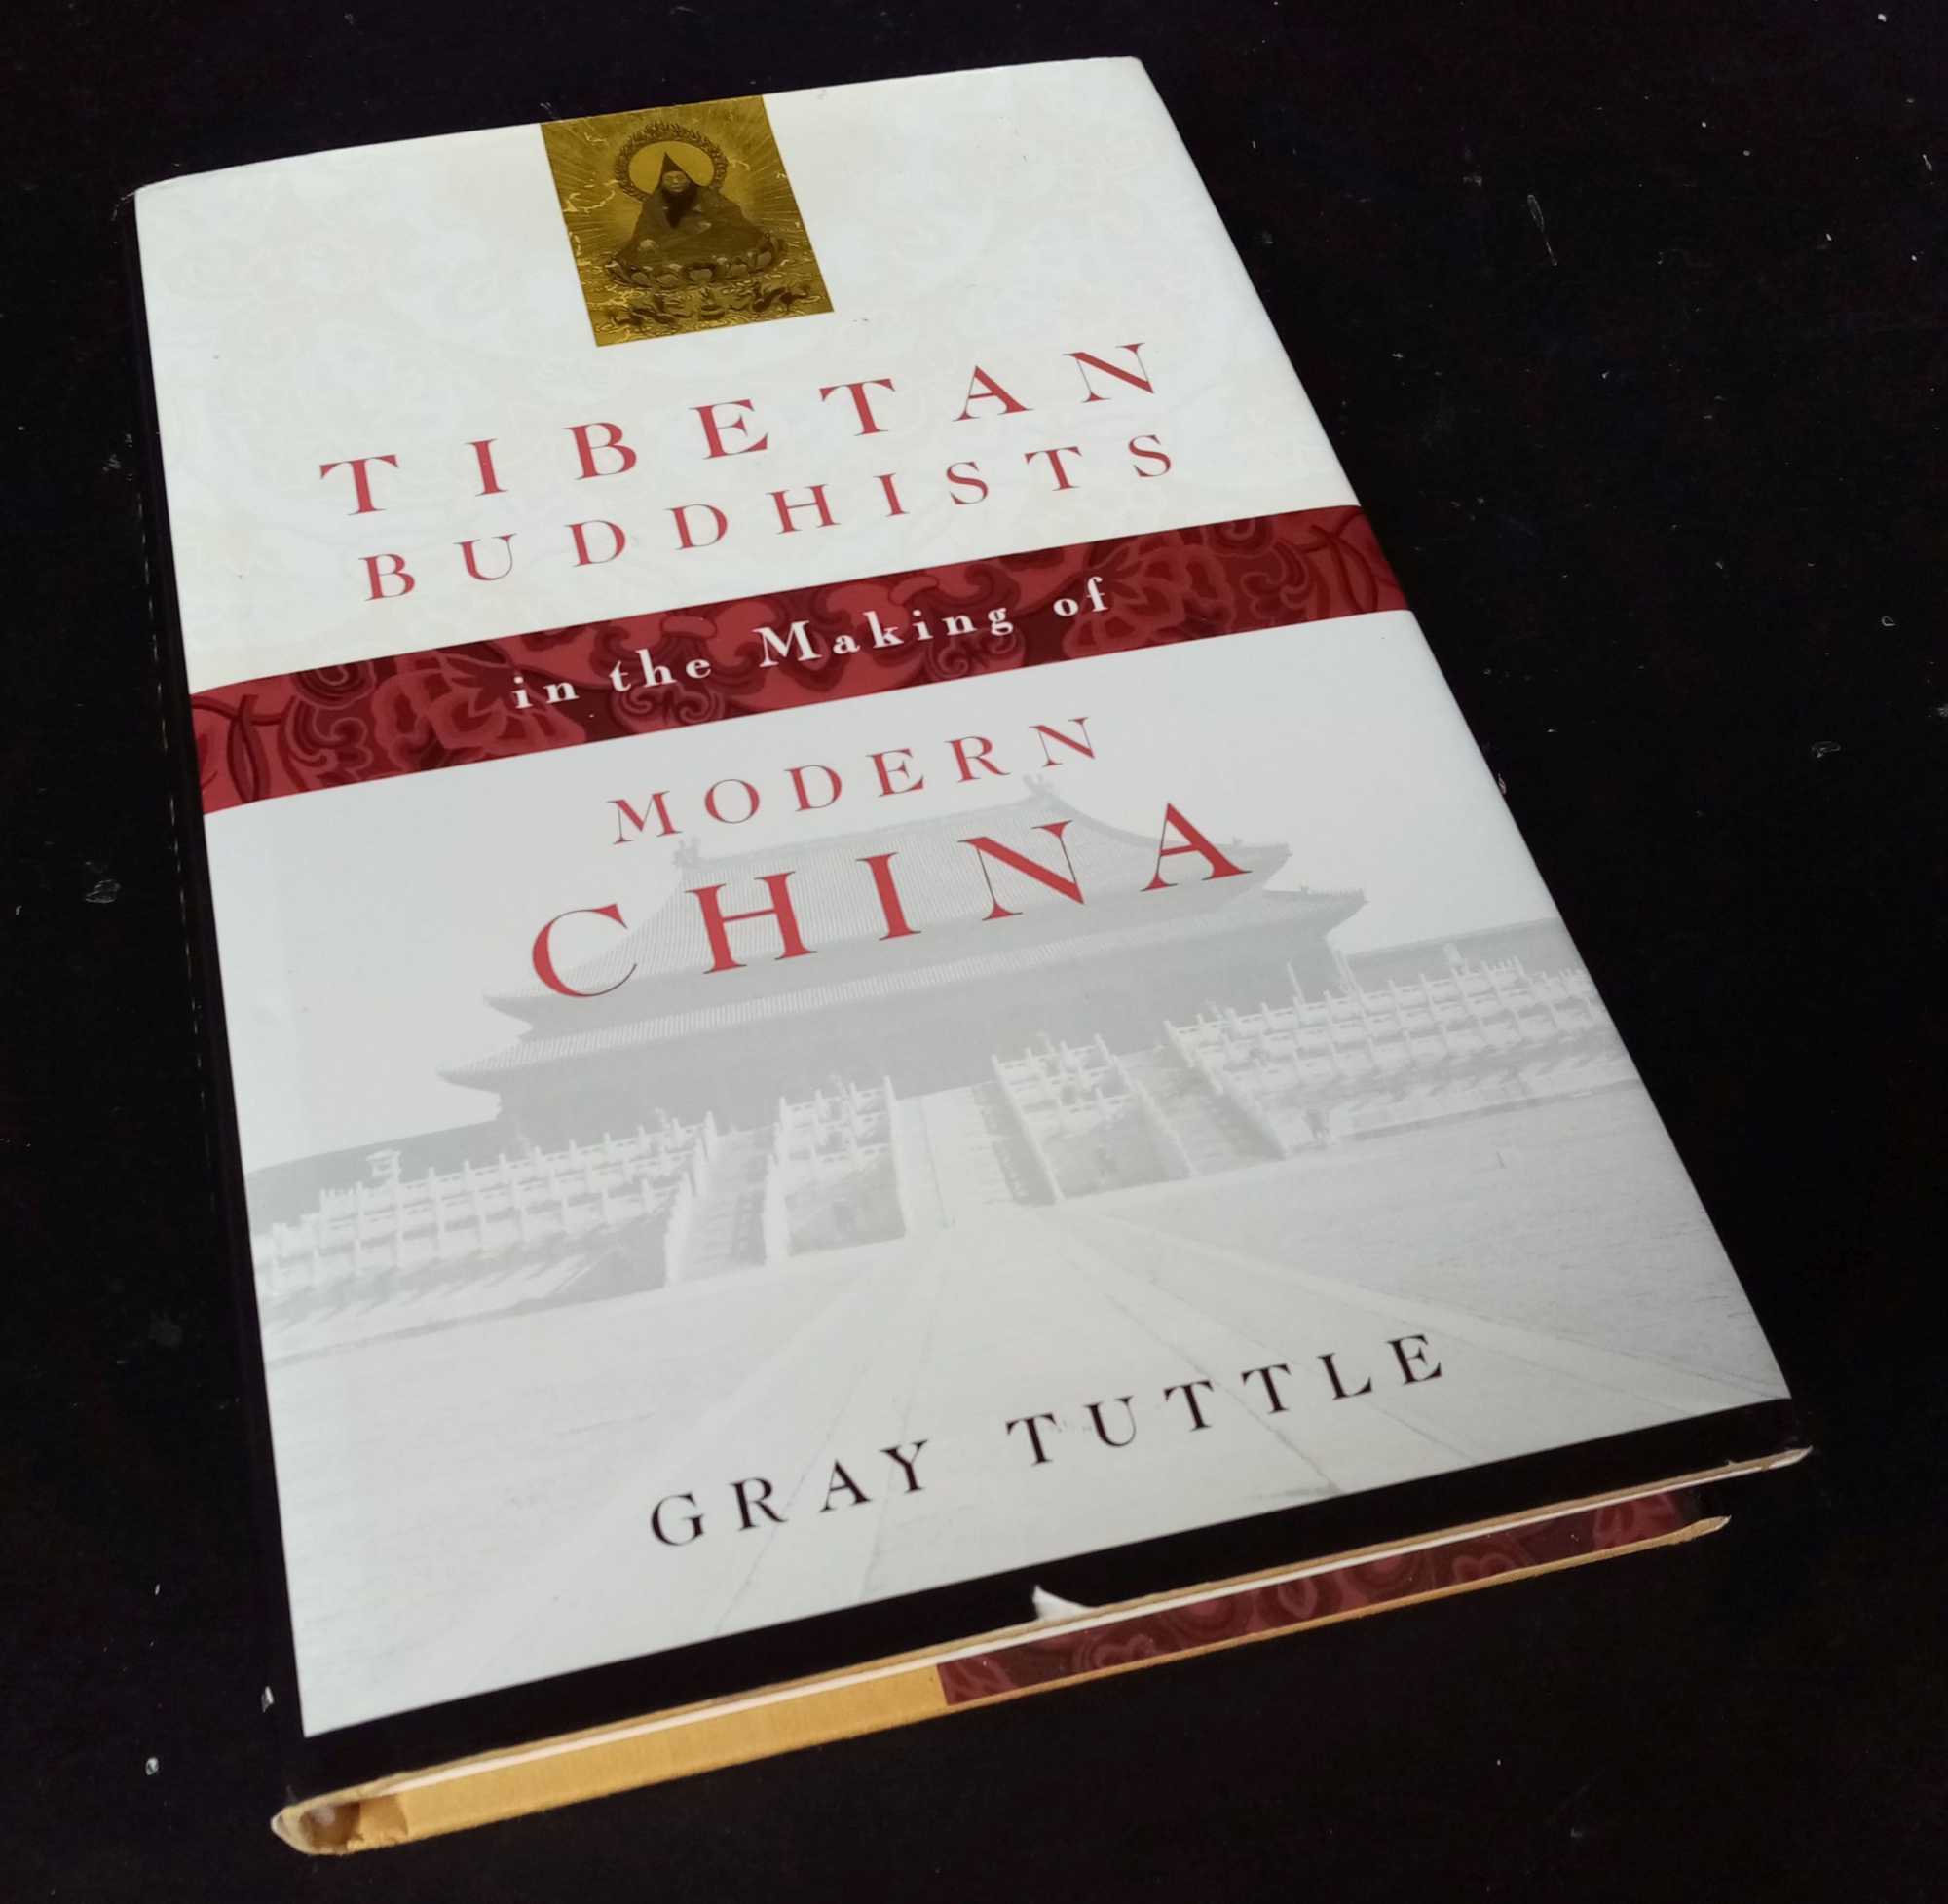 Gray Tuttle - Tibetan Buddhists in the Making of Modern China